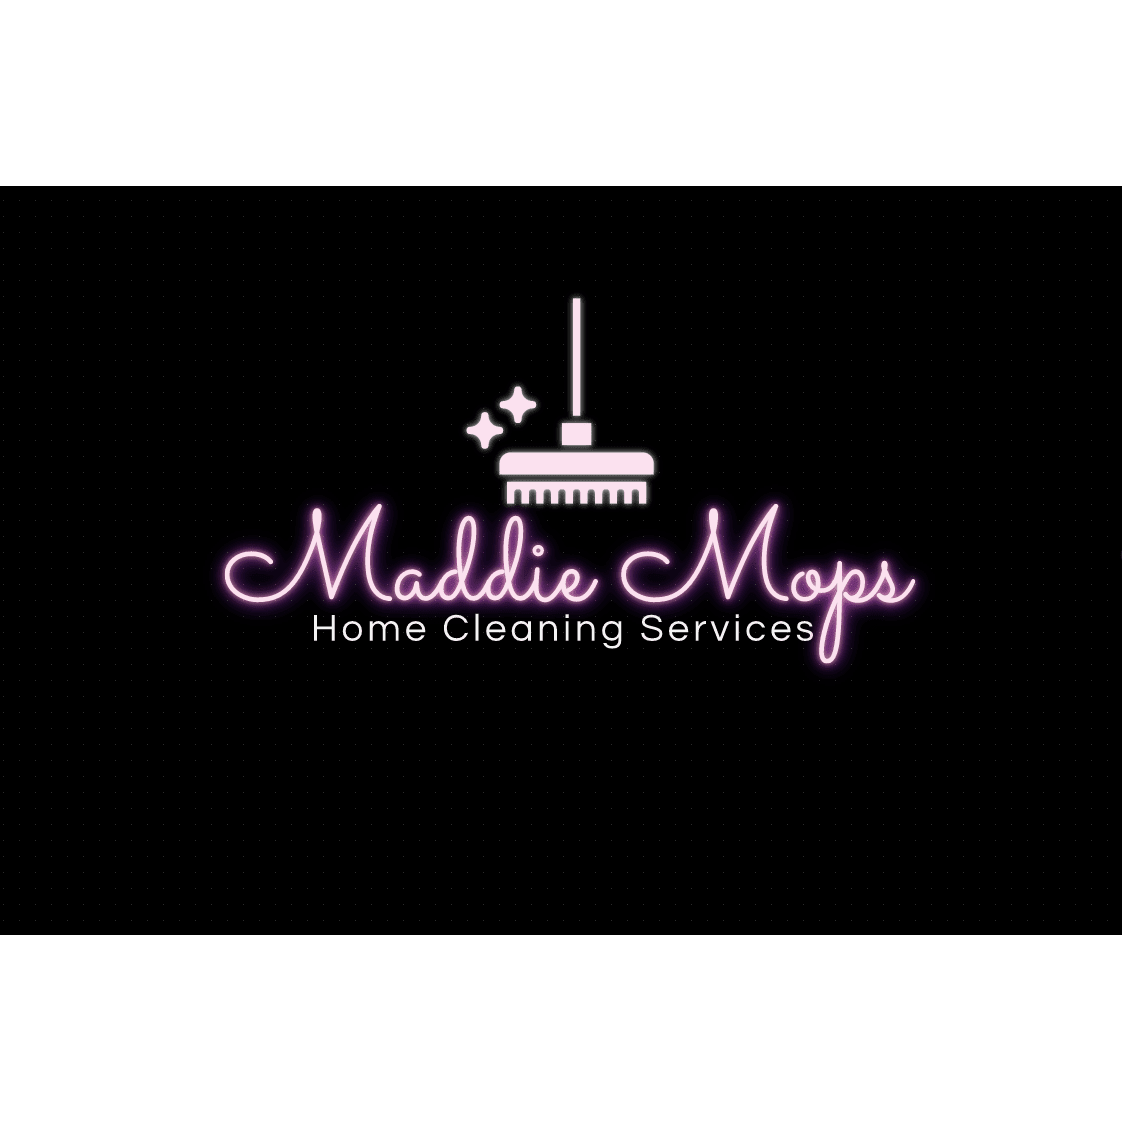 Maddie Mops Home Cleaning Services - Wolverhampton, West Midlands WV3 7AJ - 07425 603312 | ShowMeLocal.com